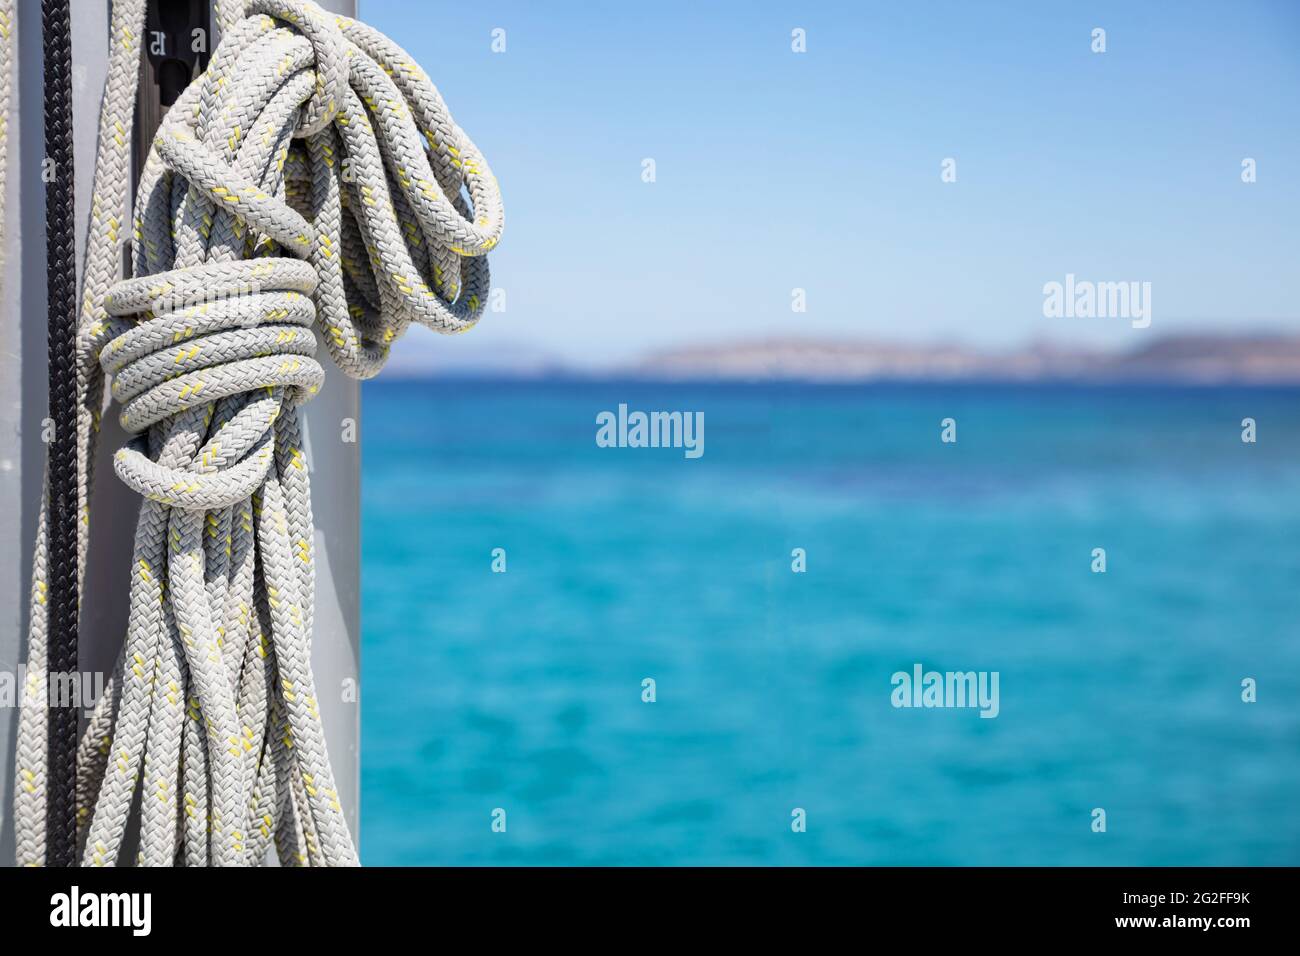 Sailboat equipment, Yachting rope tied to the ship mast. Mooring ropes on the sailing boat, blur seascape background. Closeup view, copy space. Sailbo Stock Photo